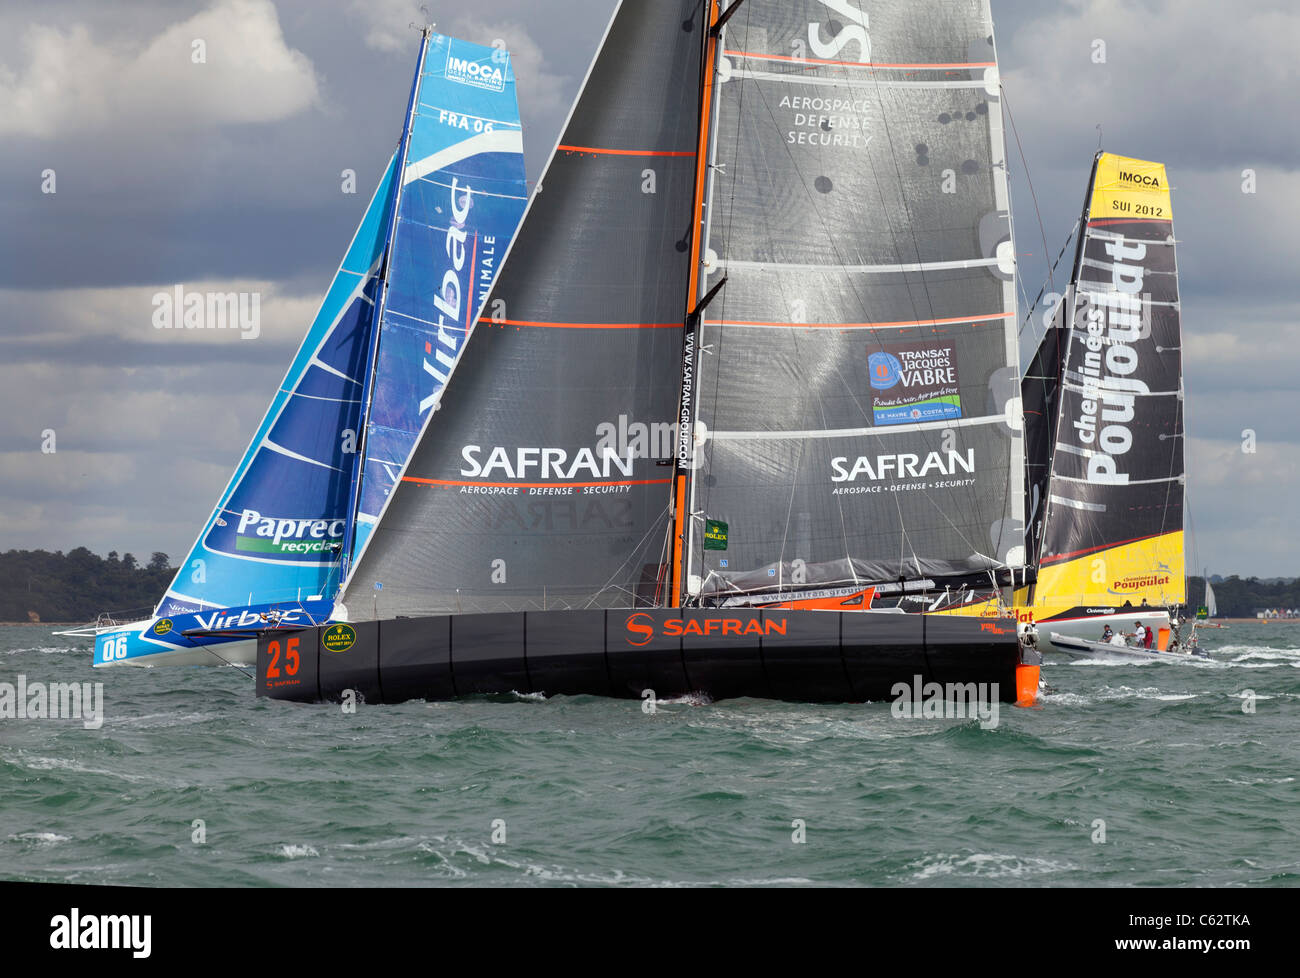 Gray sail racing yacht high tech modern performance fast carbon fibre Fastnet 2011 Race UK Solent Safran FRA 25 state of the art Stock Photo